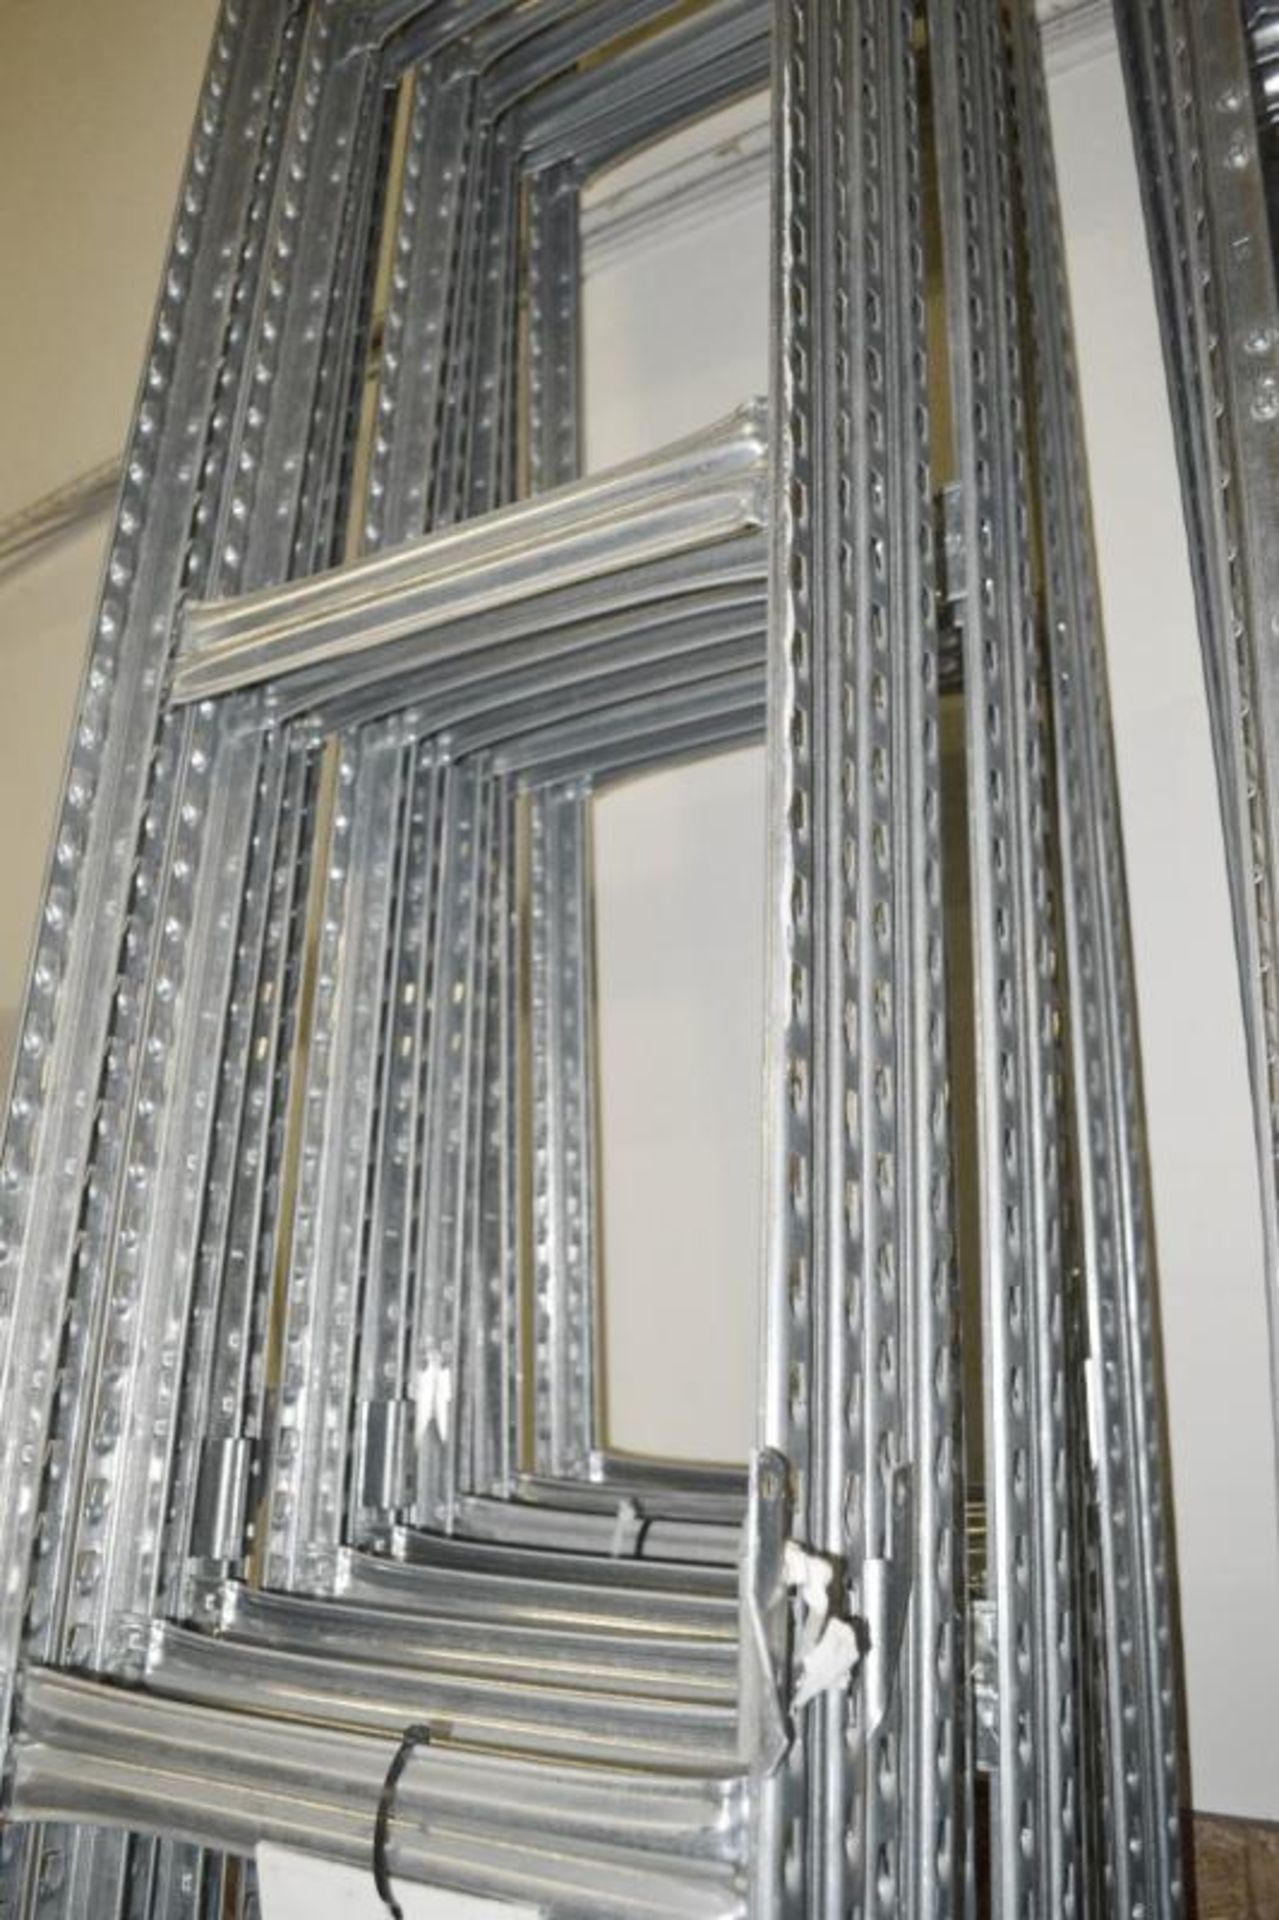 4 x Bays of Metalsistem Steel Modular Storage Shelving - Includes 29 Pieces - Recently Removed - Image 7 of 17